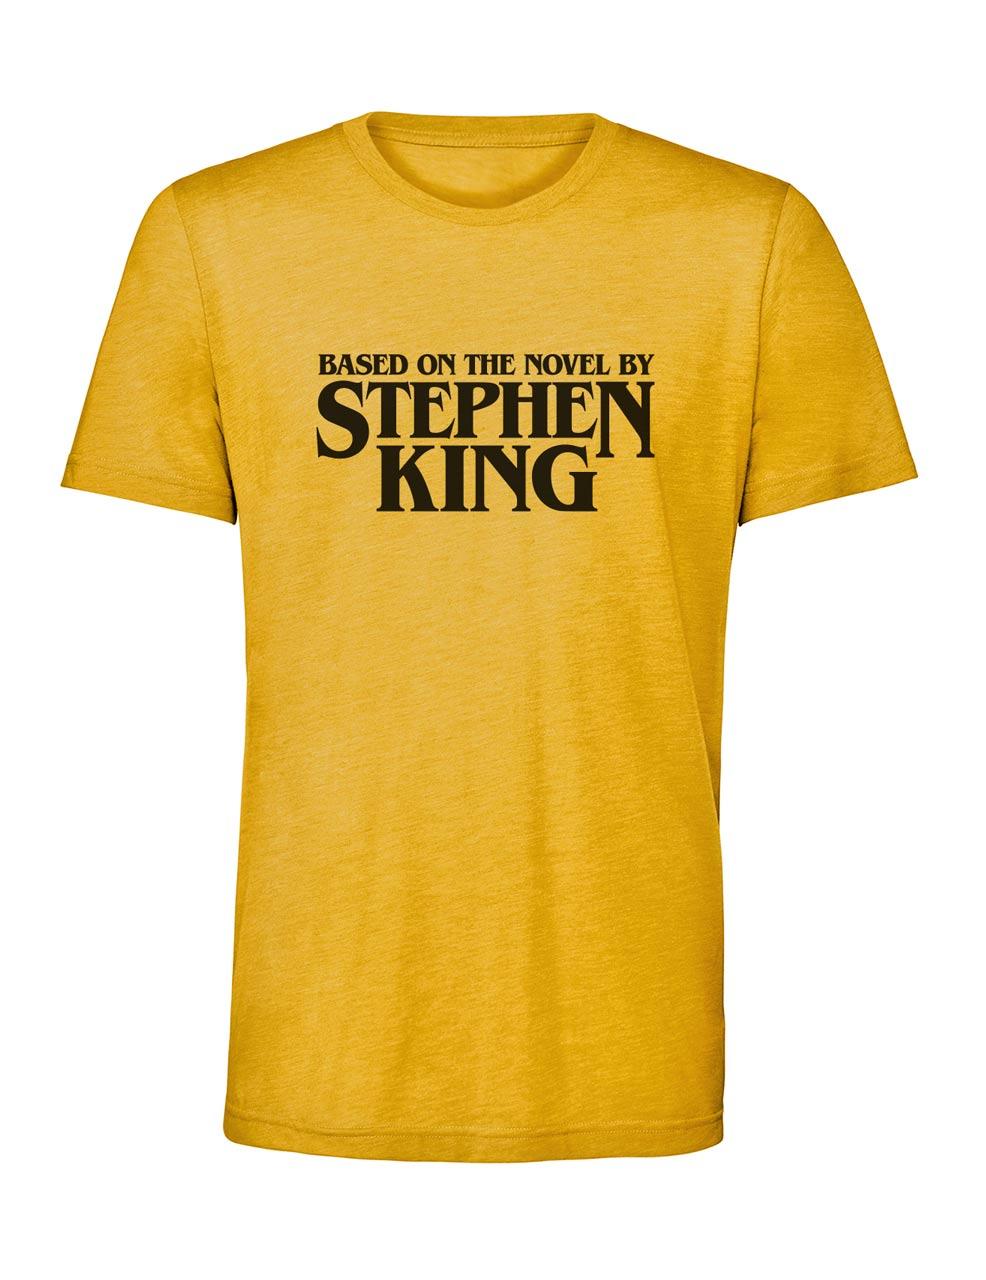 Based on the novel by Stephen Kind T-shirt in mustard yellow